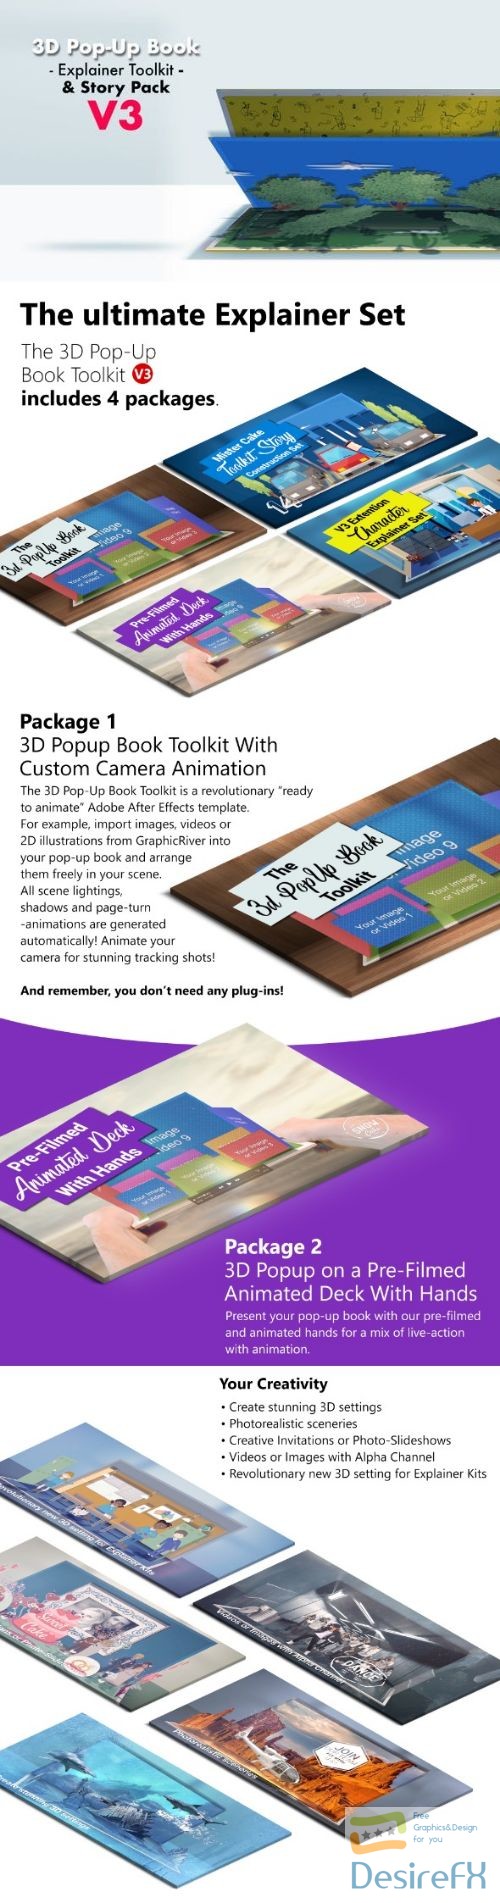 Videohive 3D Pop-Up Book Explainer Toolkit &amp; Story Pack V3 19845454